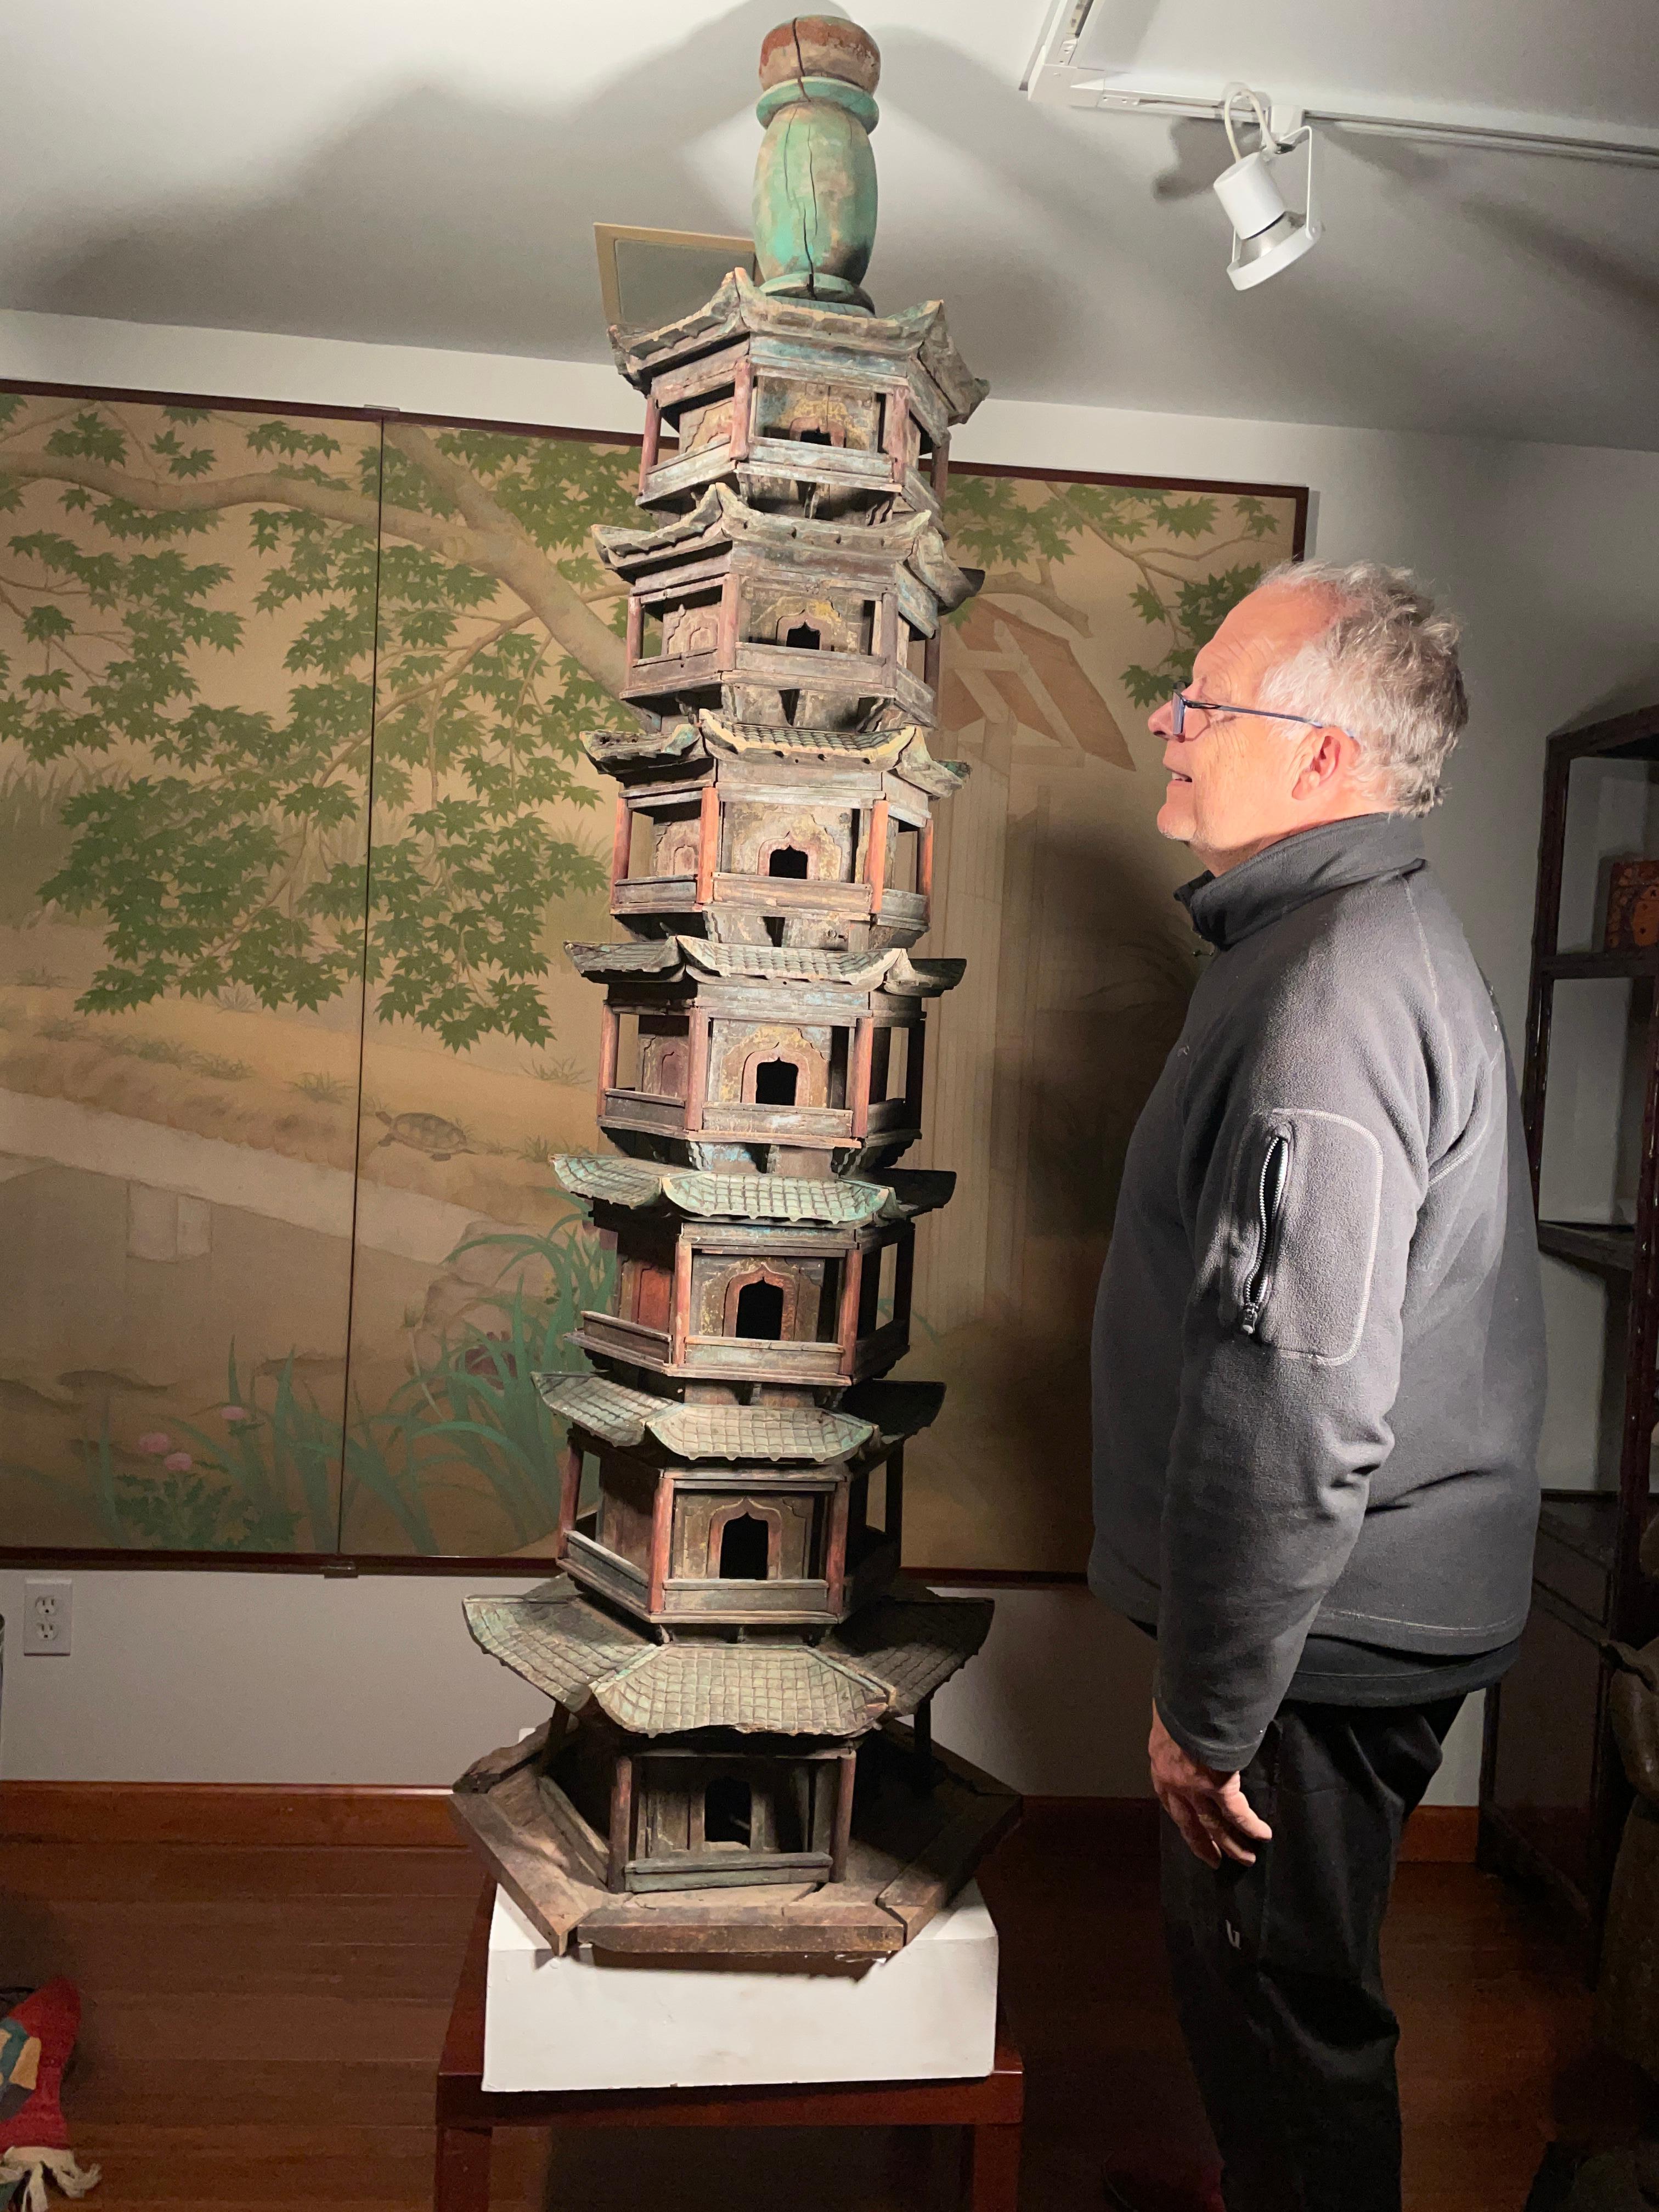 China antique monumental Wooden Pagoda, total height is 70 inches, hand carved and hand painted wood, seven hexagonal sections plus finial, late Qing dynasty (1644-1911)

This is a monumental work of art seldom seen in the west. Pagodas evolved from